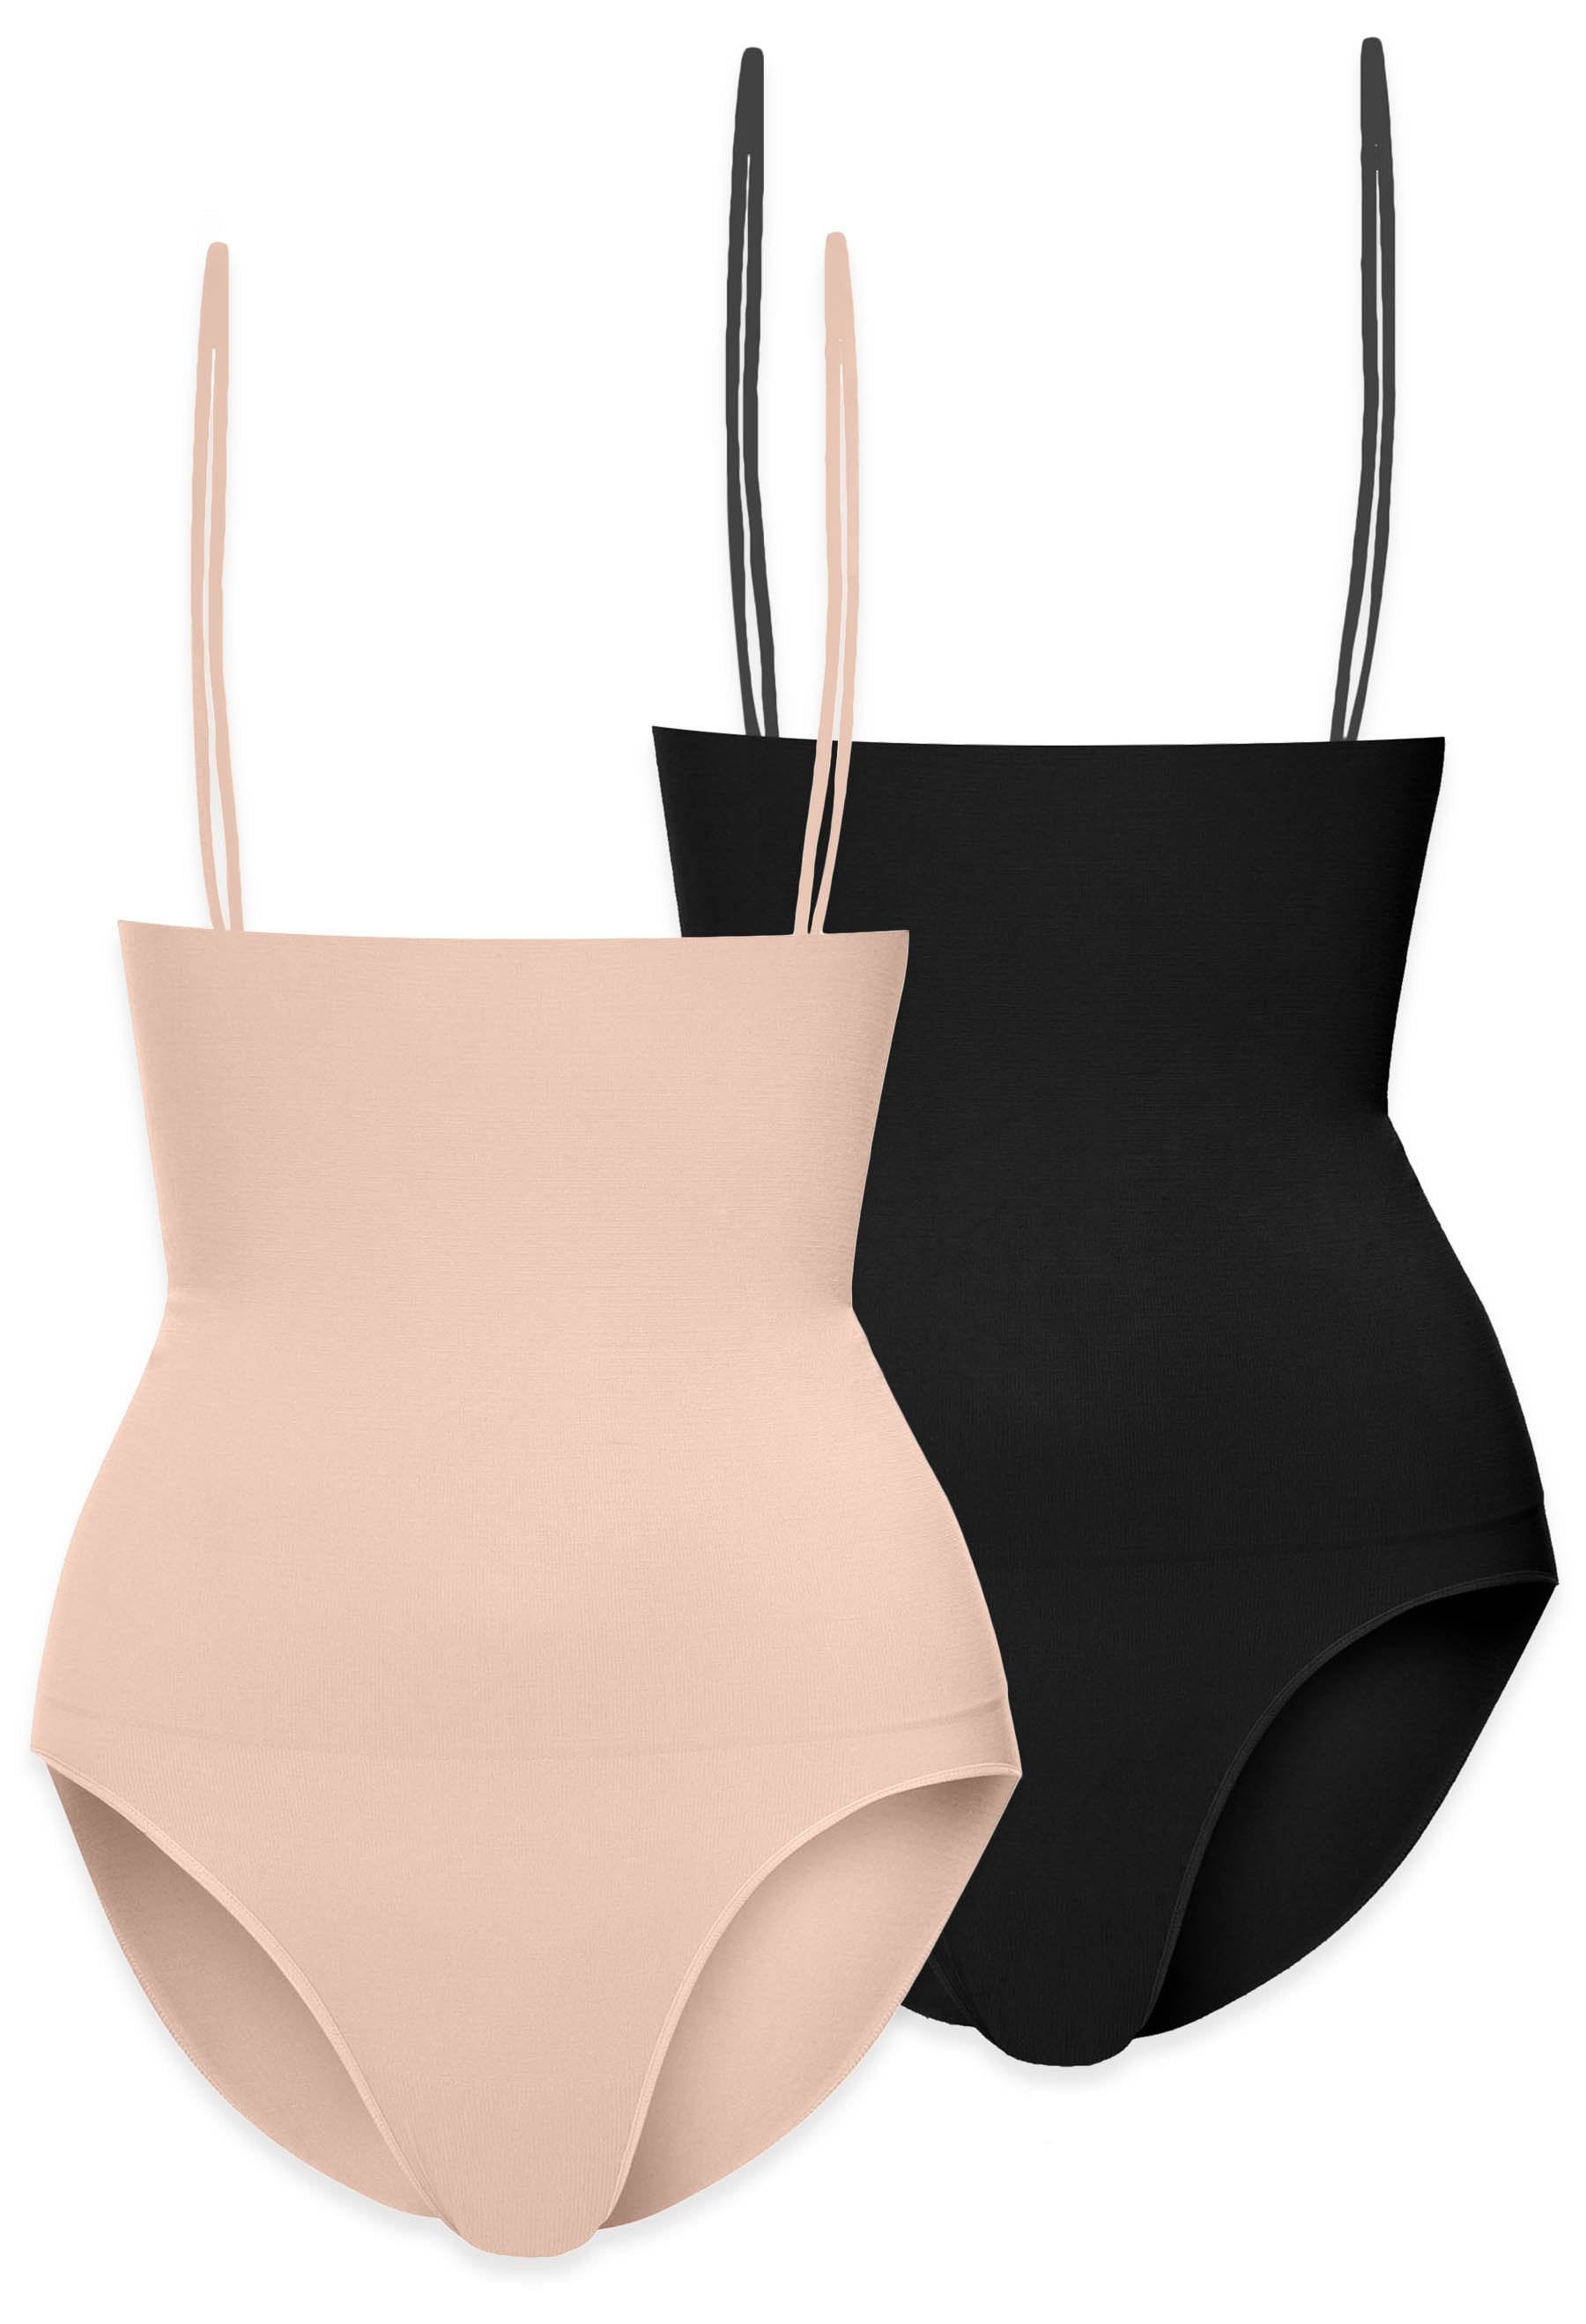 Curvy Underbust Stay Up Brief - 2 Pack